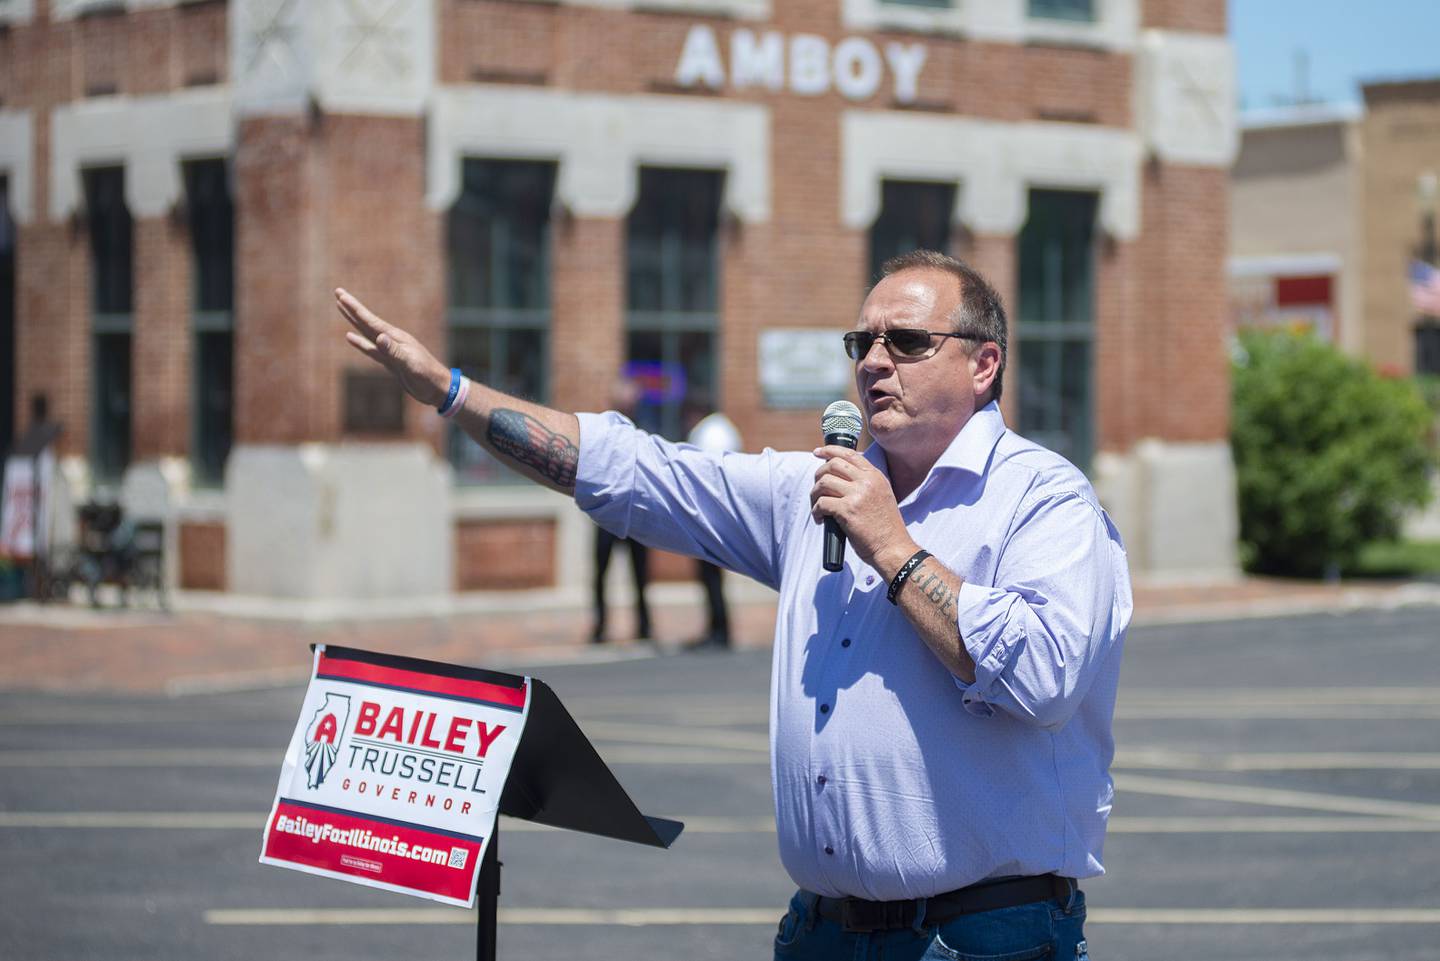 Illinois attorney general candidate Thomas DaVore speaks to a crowd of supporters Friday, June 17, 2022 in Amboy.